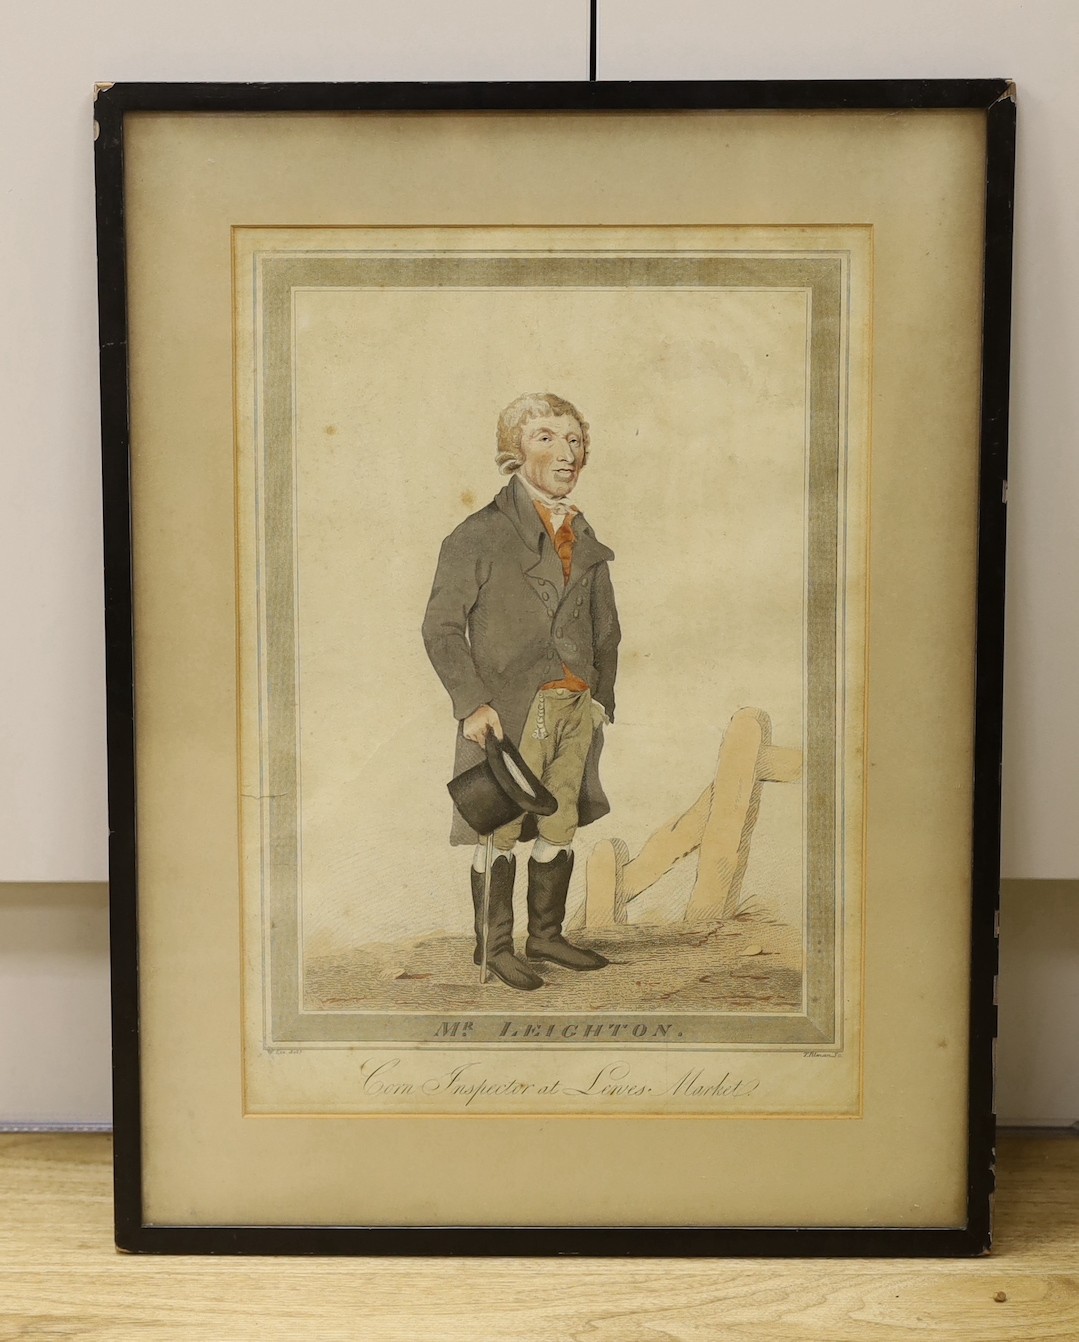 T. Illman after W. Lee, hand coloured engraving, 'Mr Leighton, Corn Inspector at Lewes Market', overall 40 x 28cm